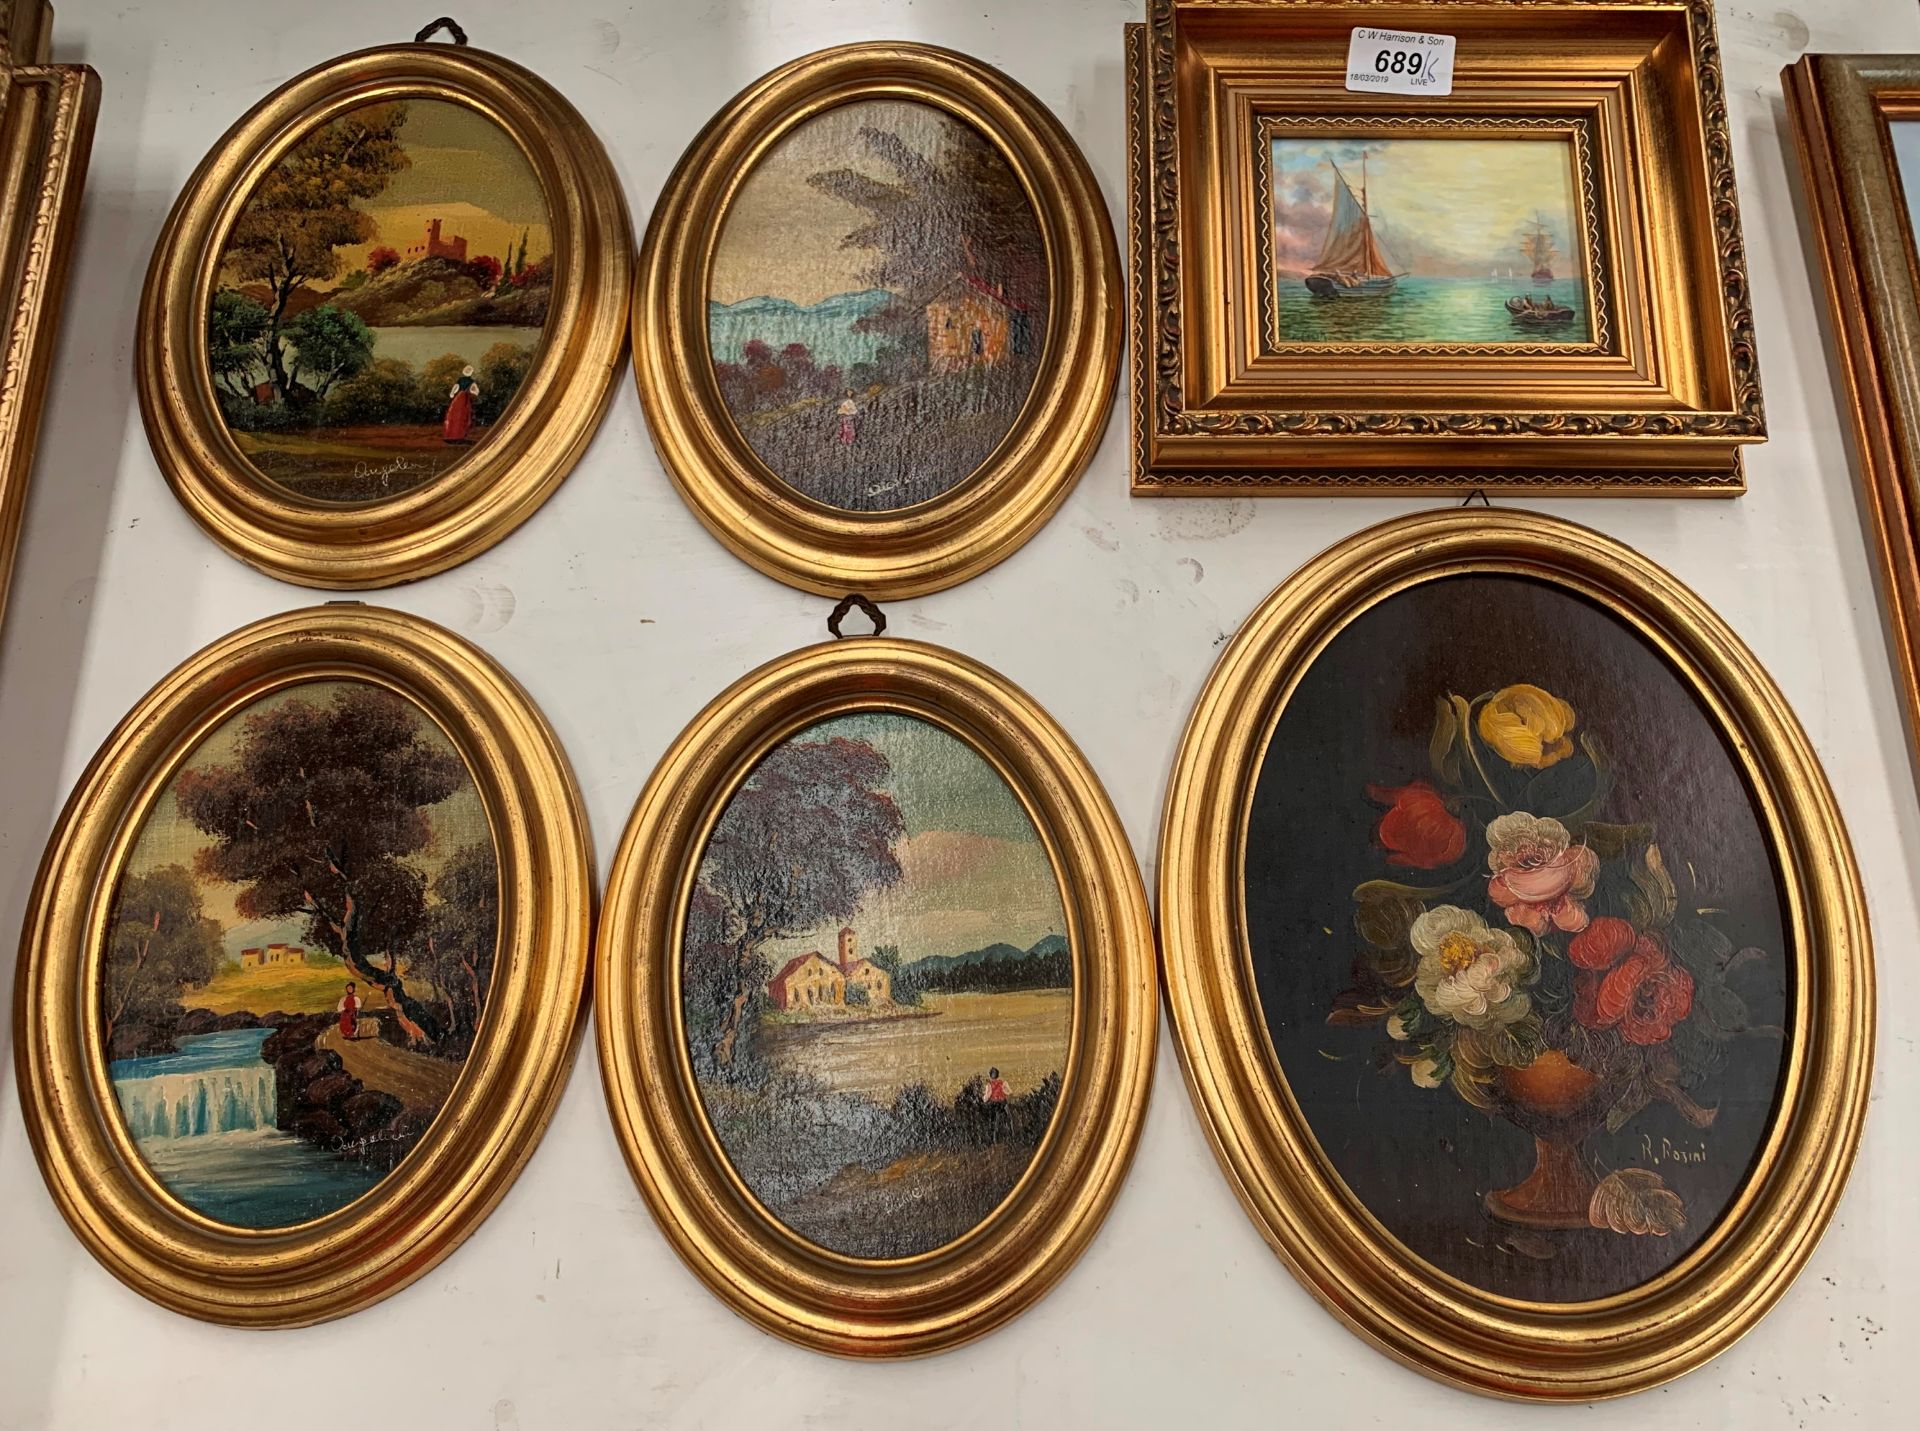 4 small oval framed Continental country scenes by Dugelicci (?), a small oval picture by R.